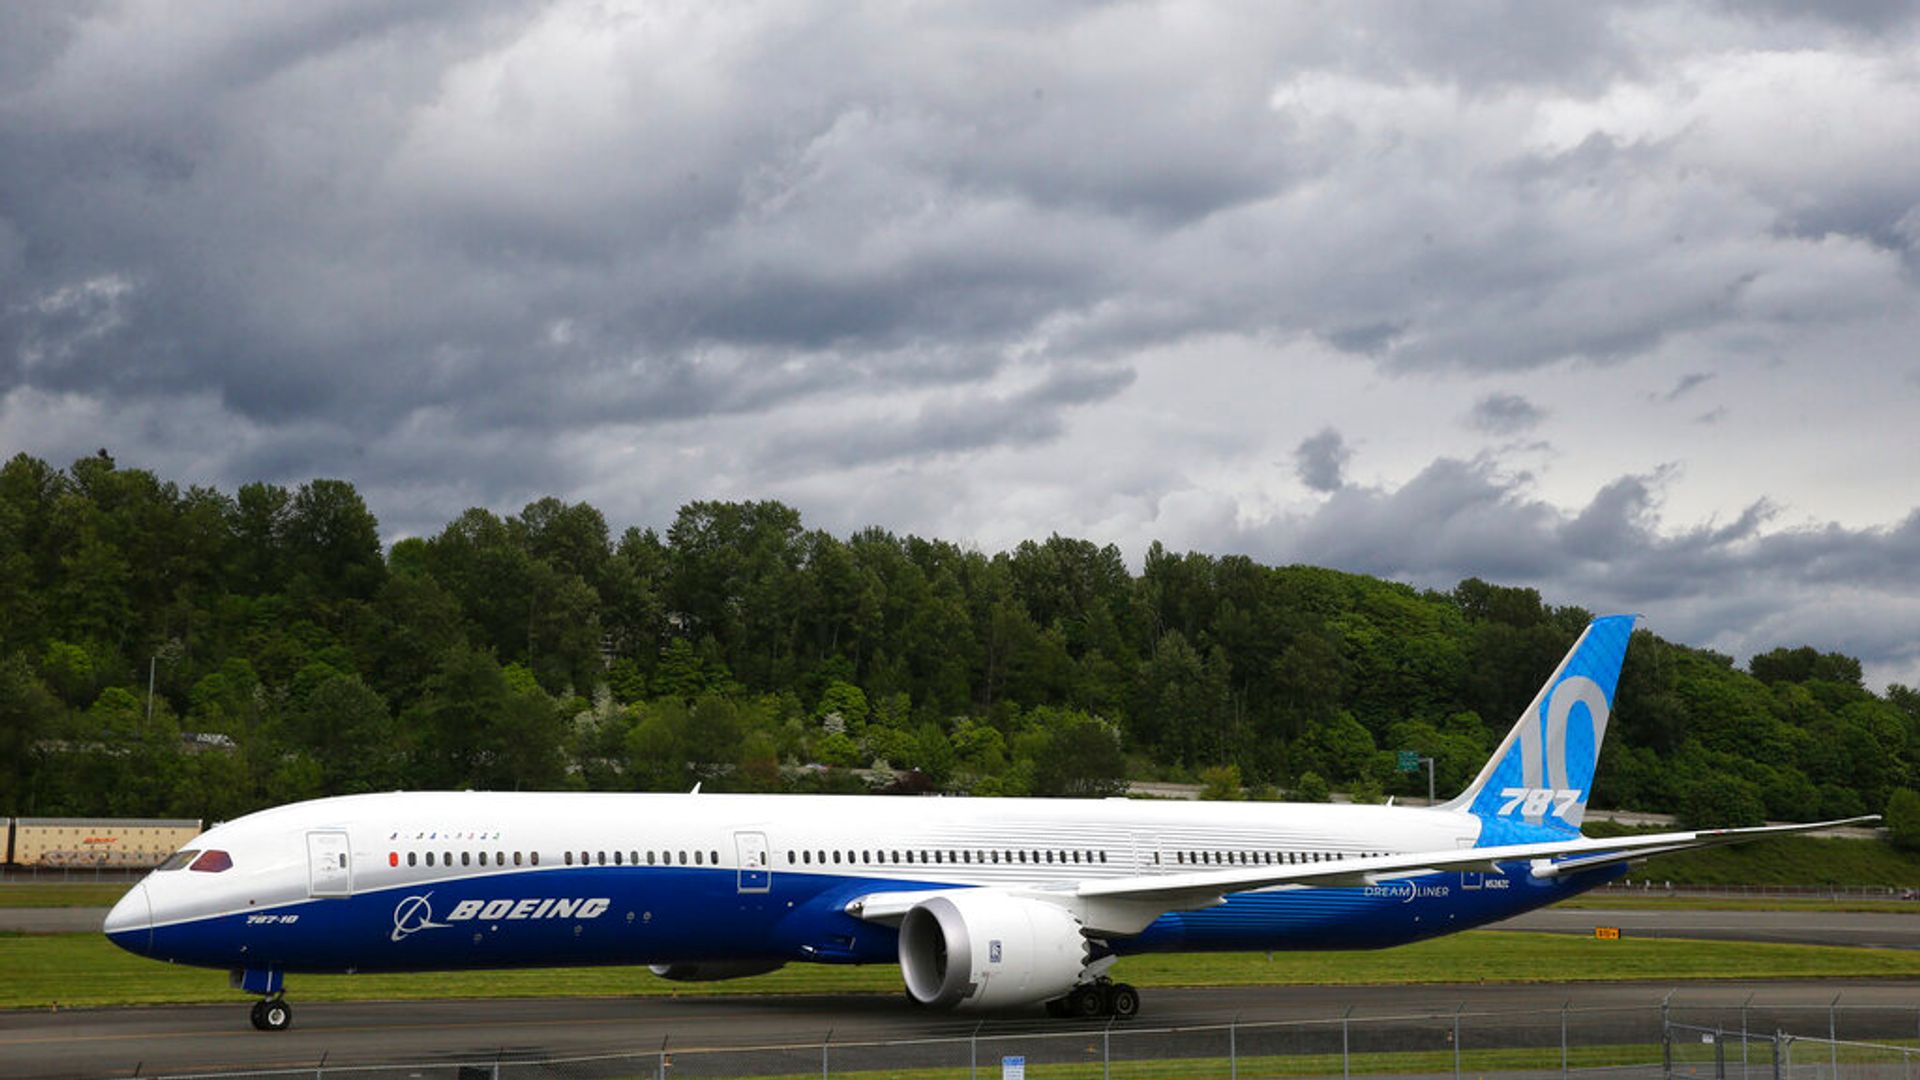 'They are putting out defective airplanes' - Boeing whistleblower claims